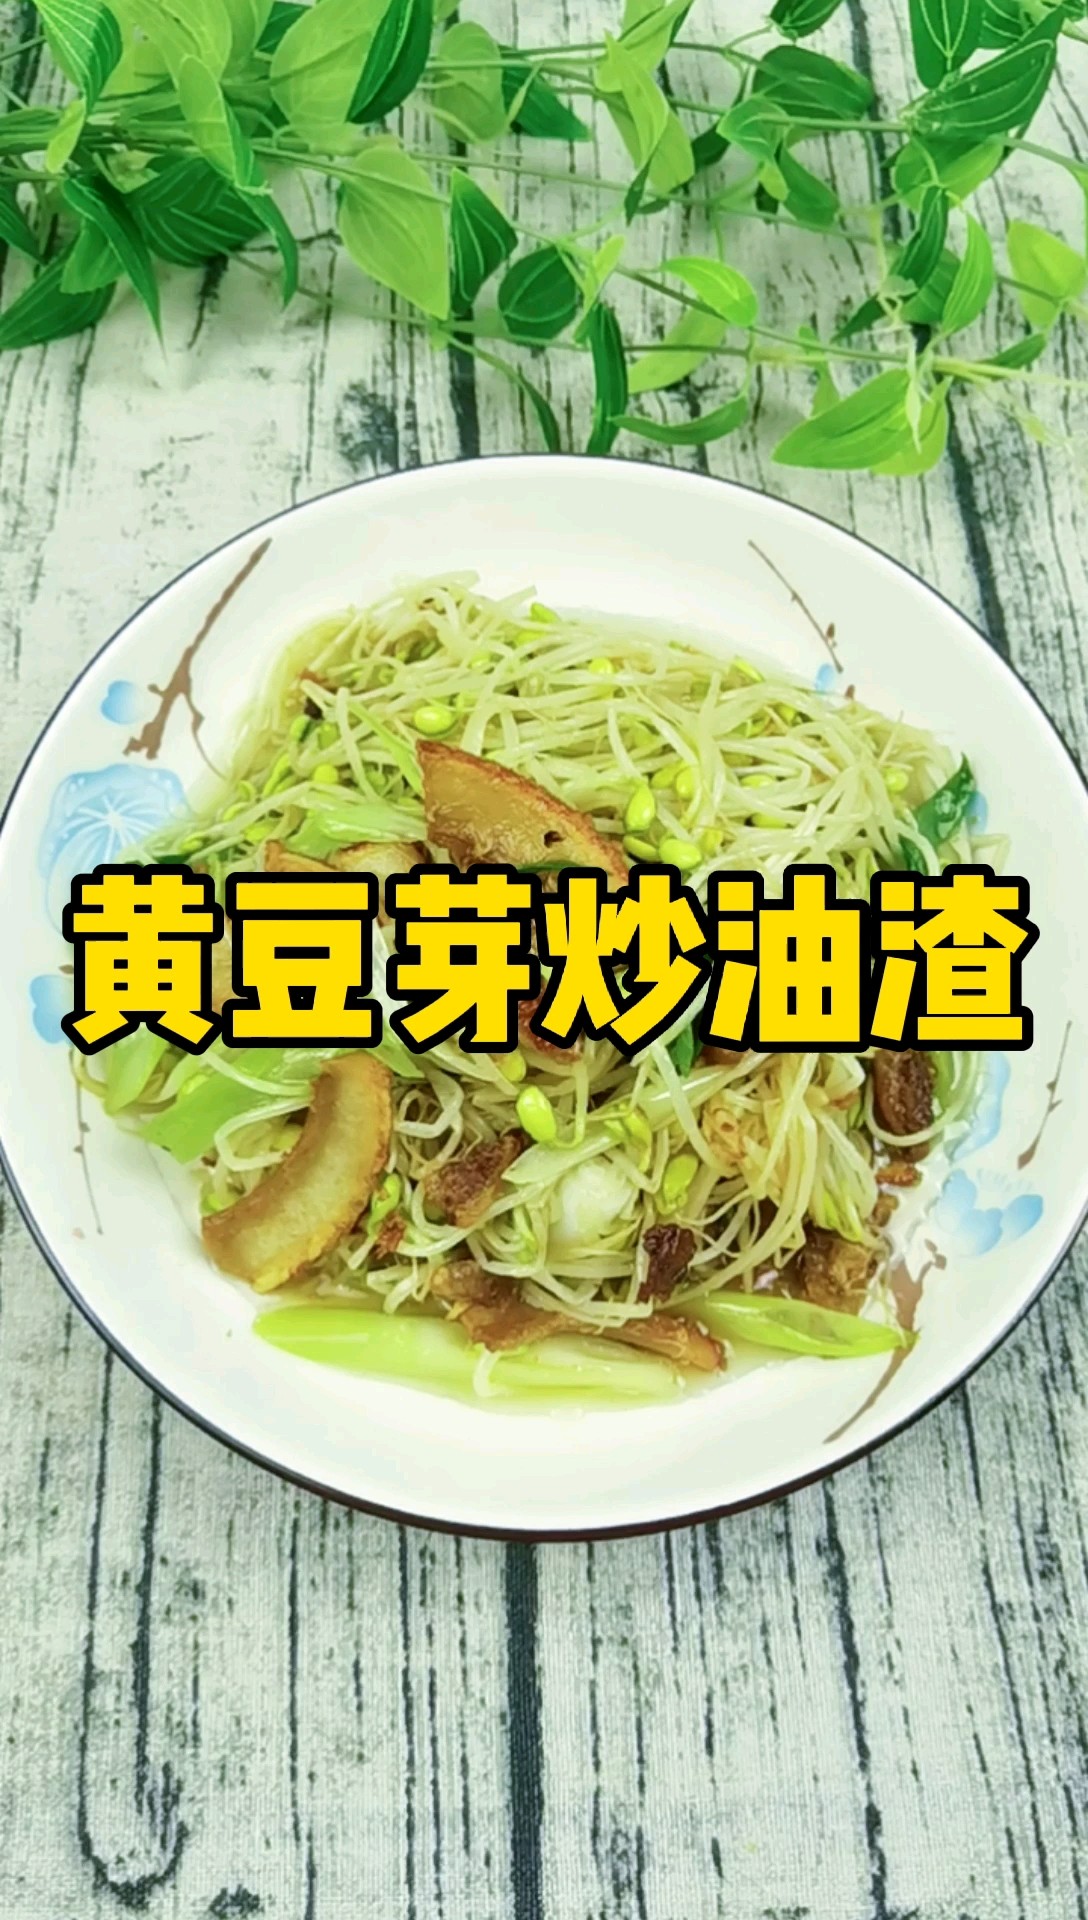 Home-cooked Small Stir-fry with Super Rice-soybean Sprouts Fried in Oily Dregs